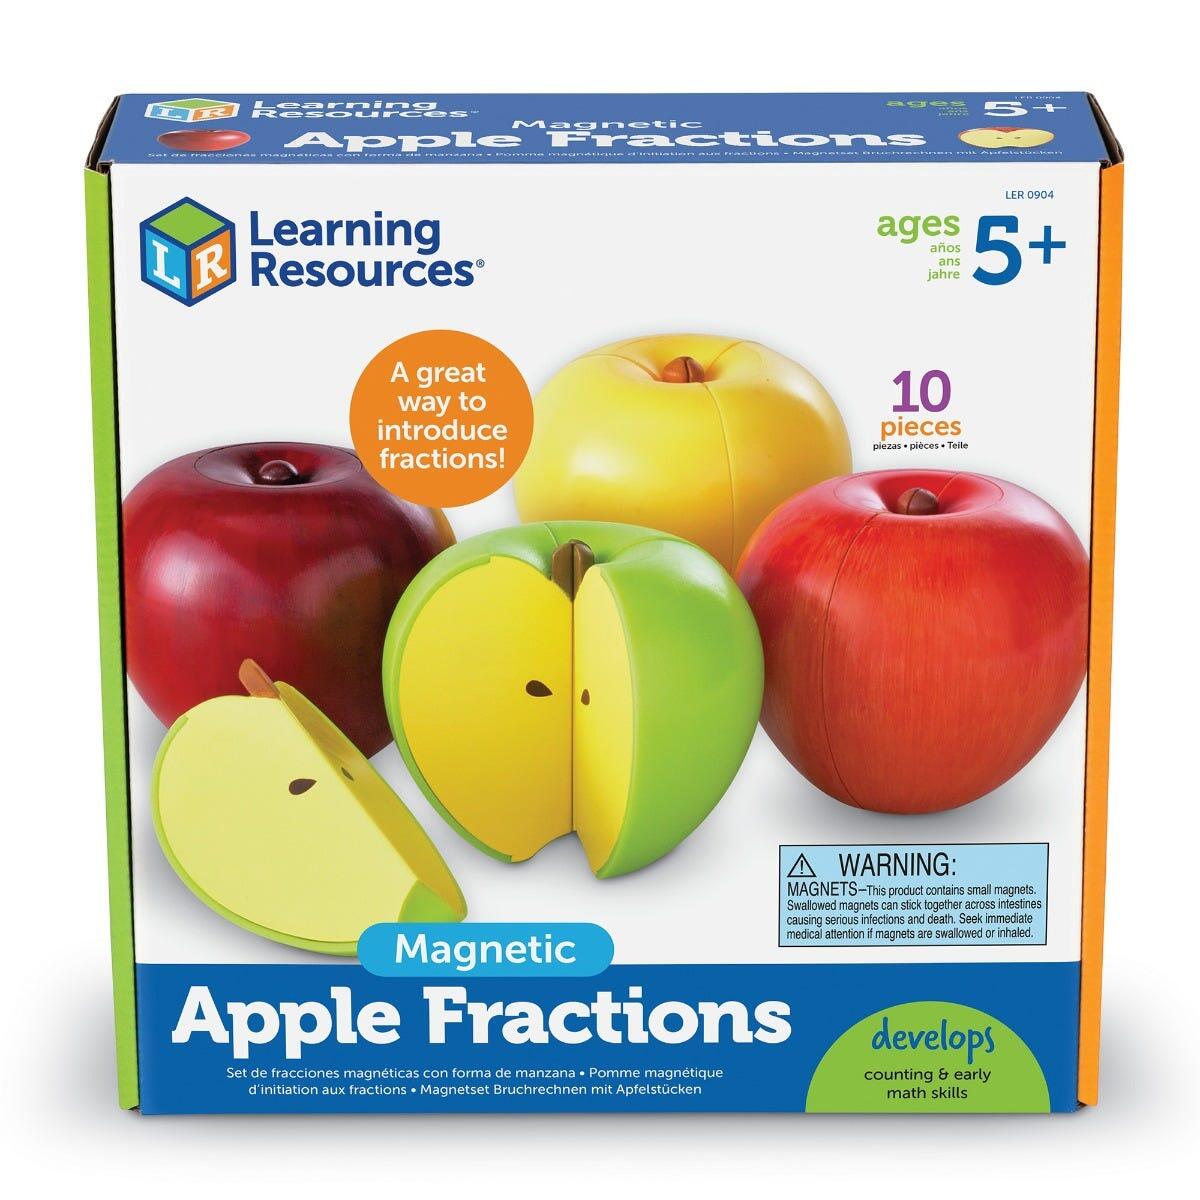 MAGNETIC APPLES FOR FRACTIONS - LEARNING RESOURCES (LER0904)